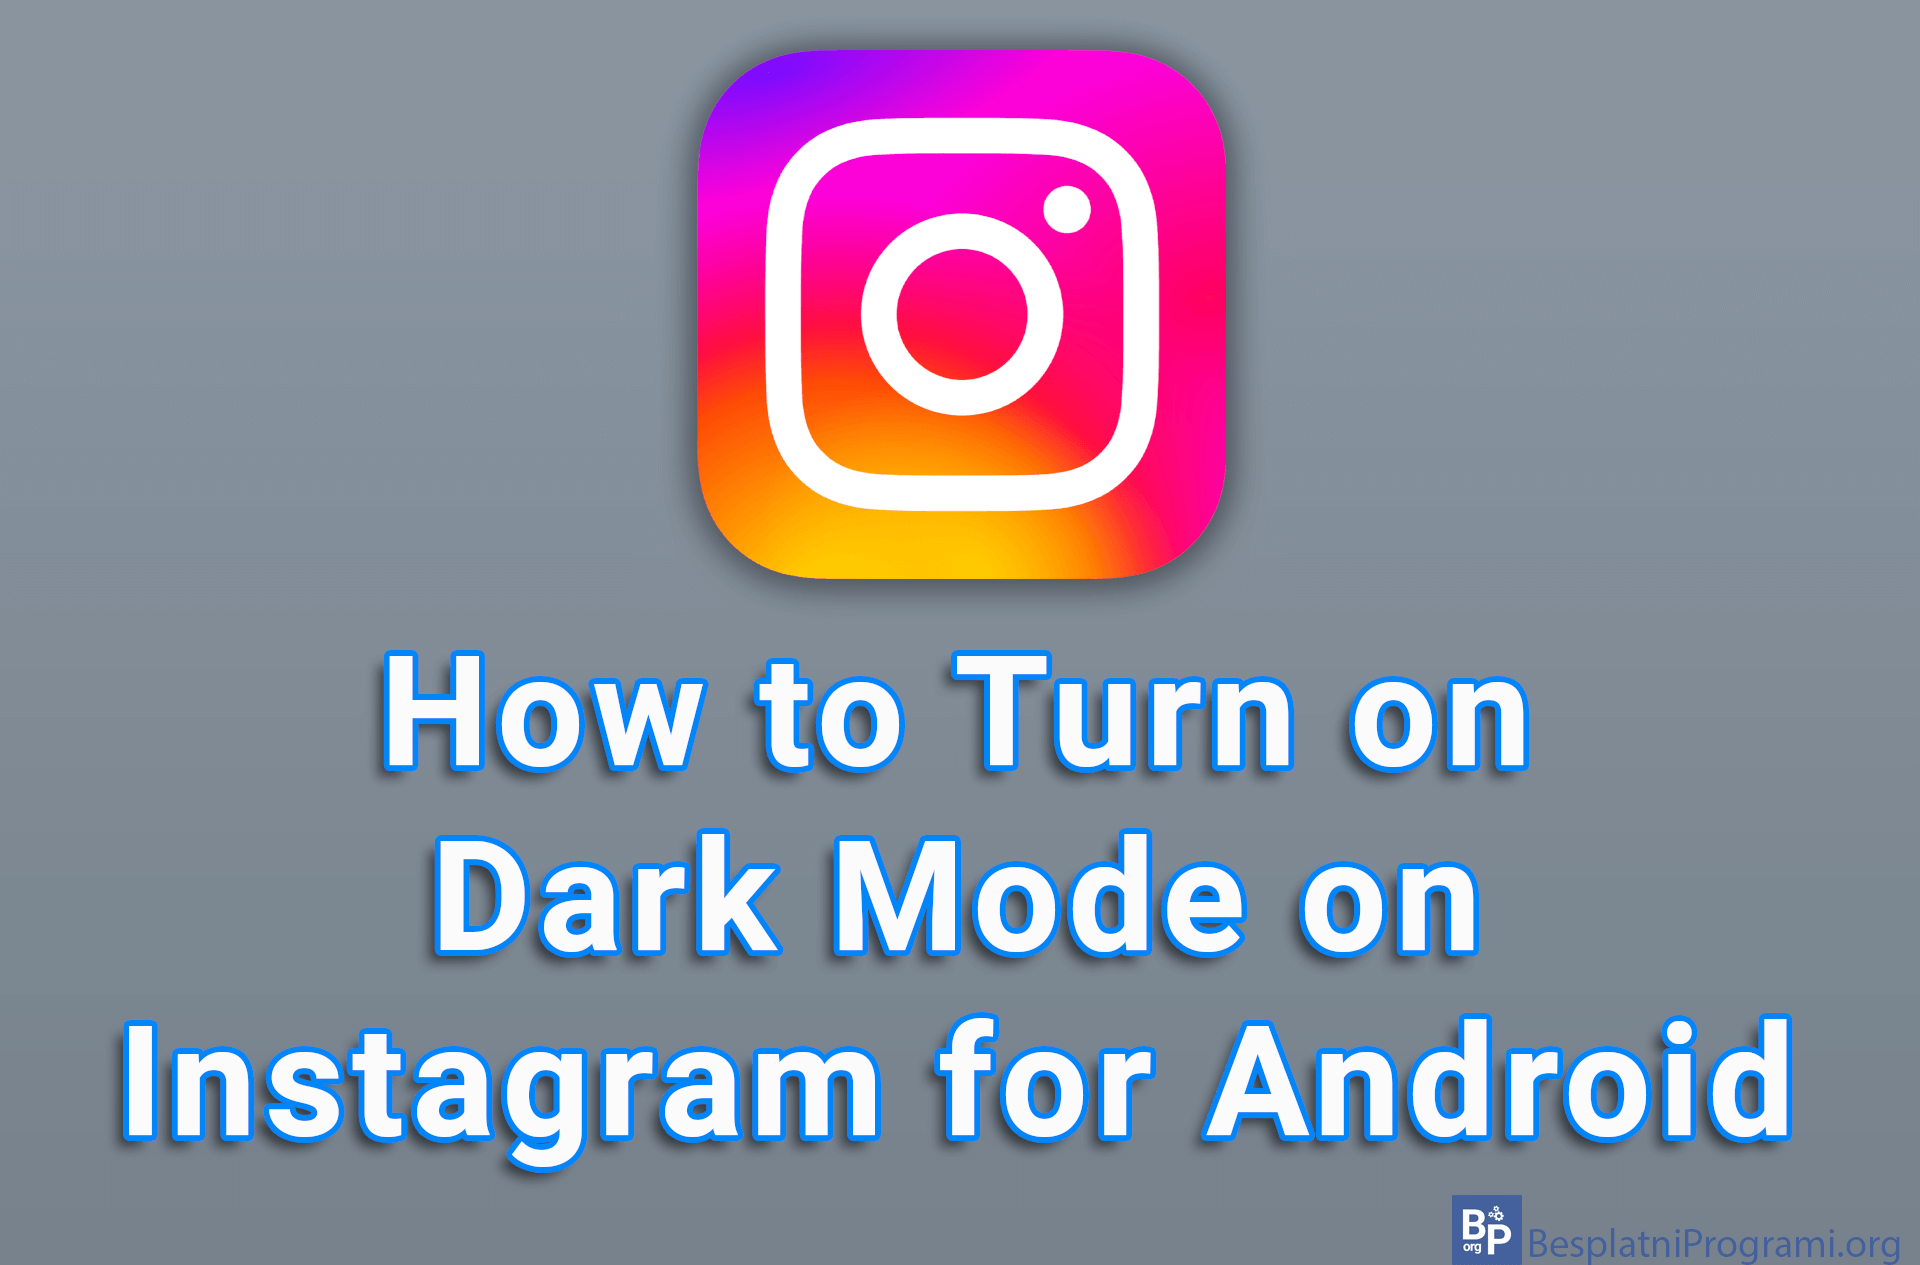 How to Turn on Dark Mode on Instagram for Android